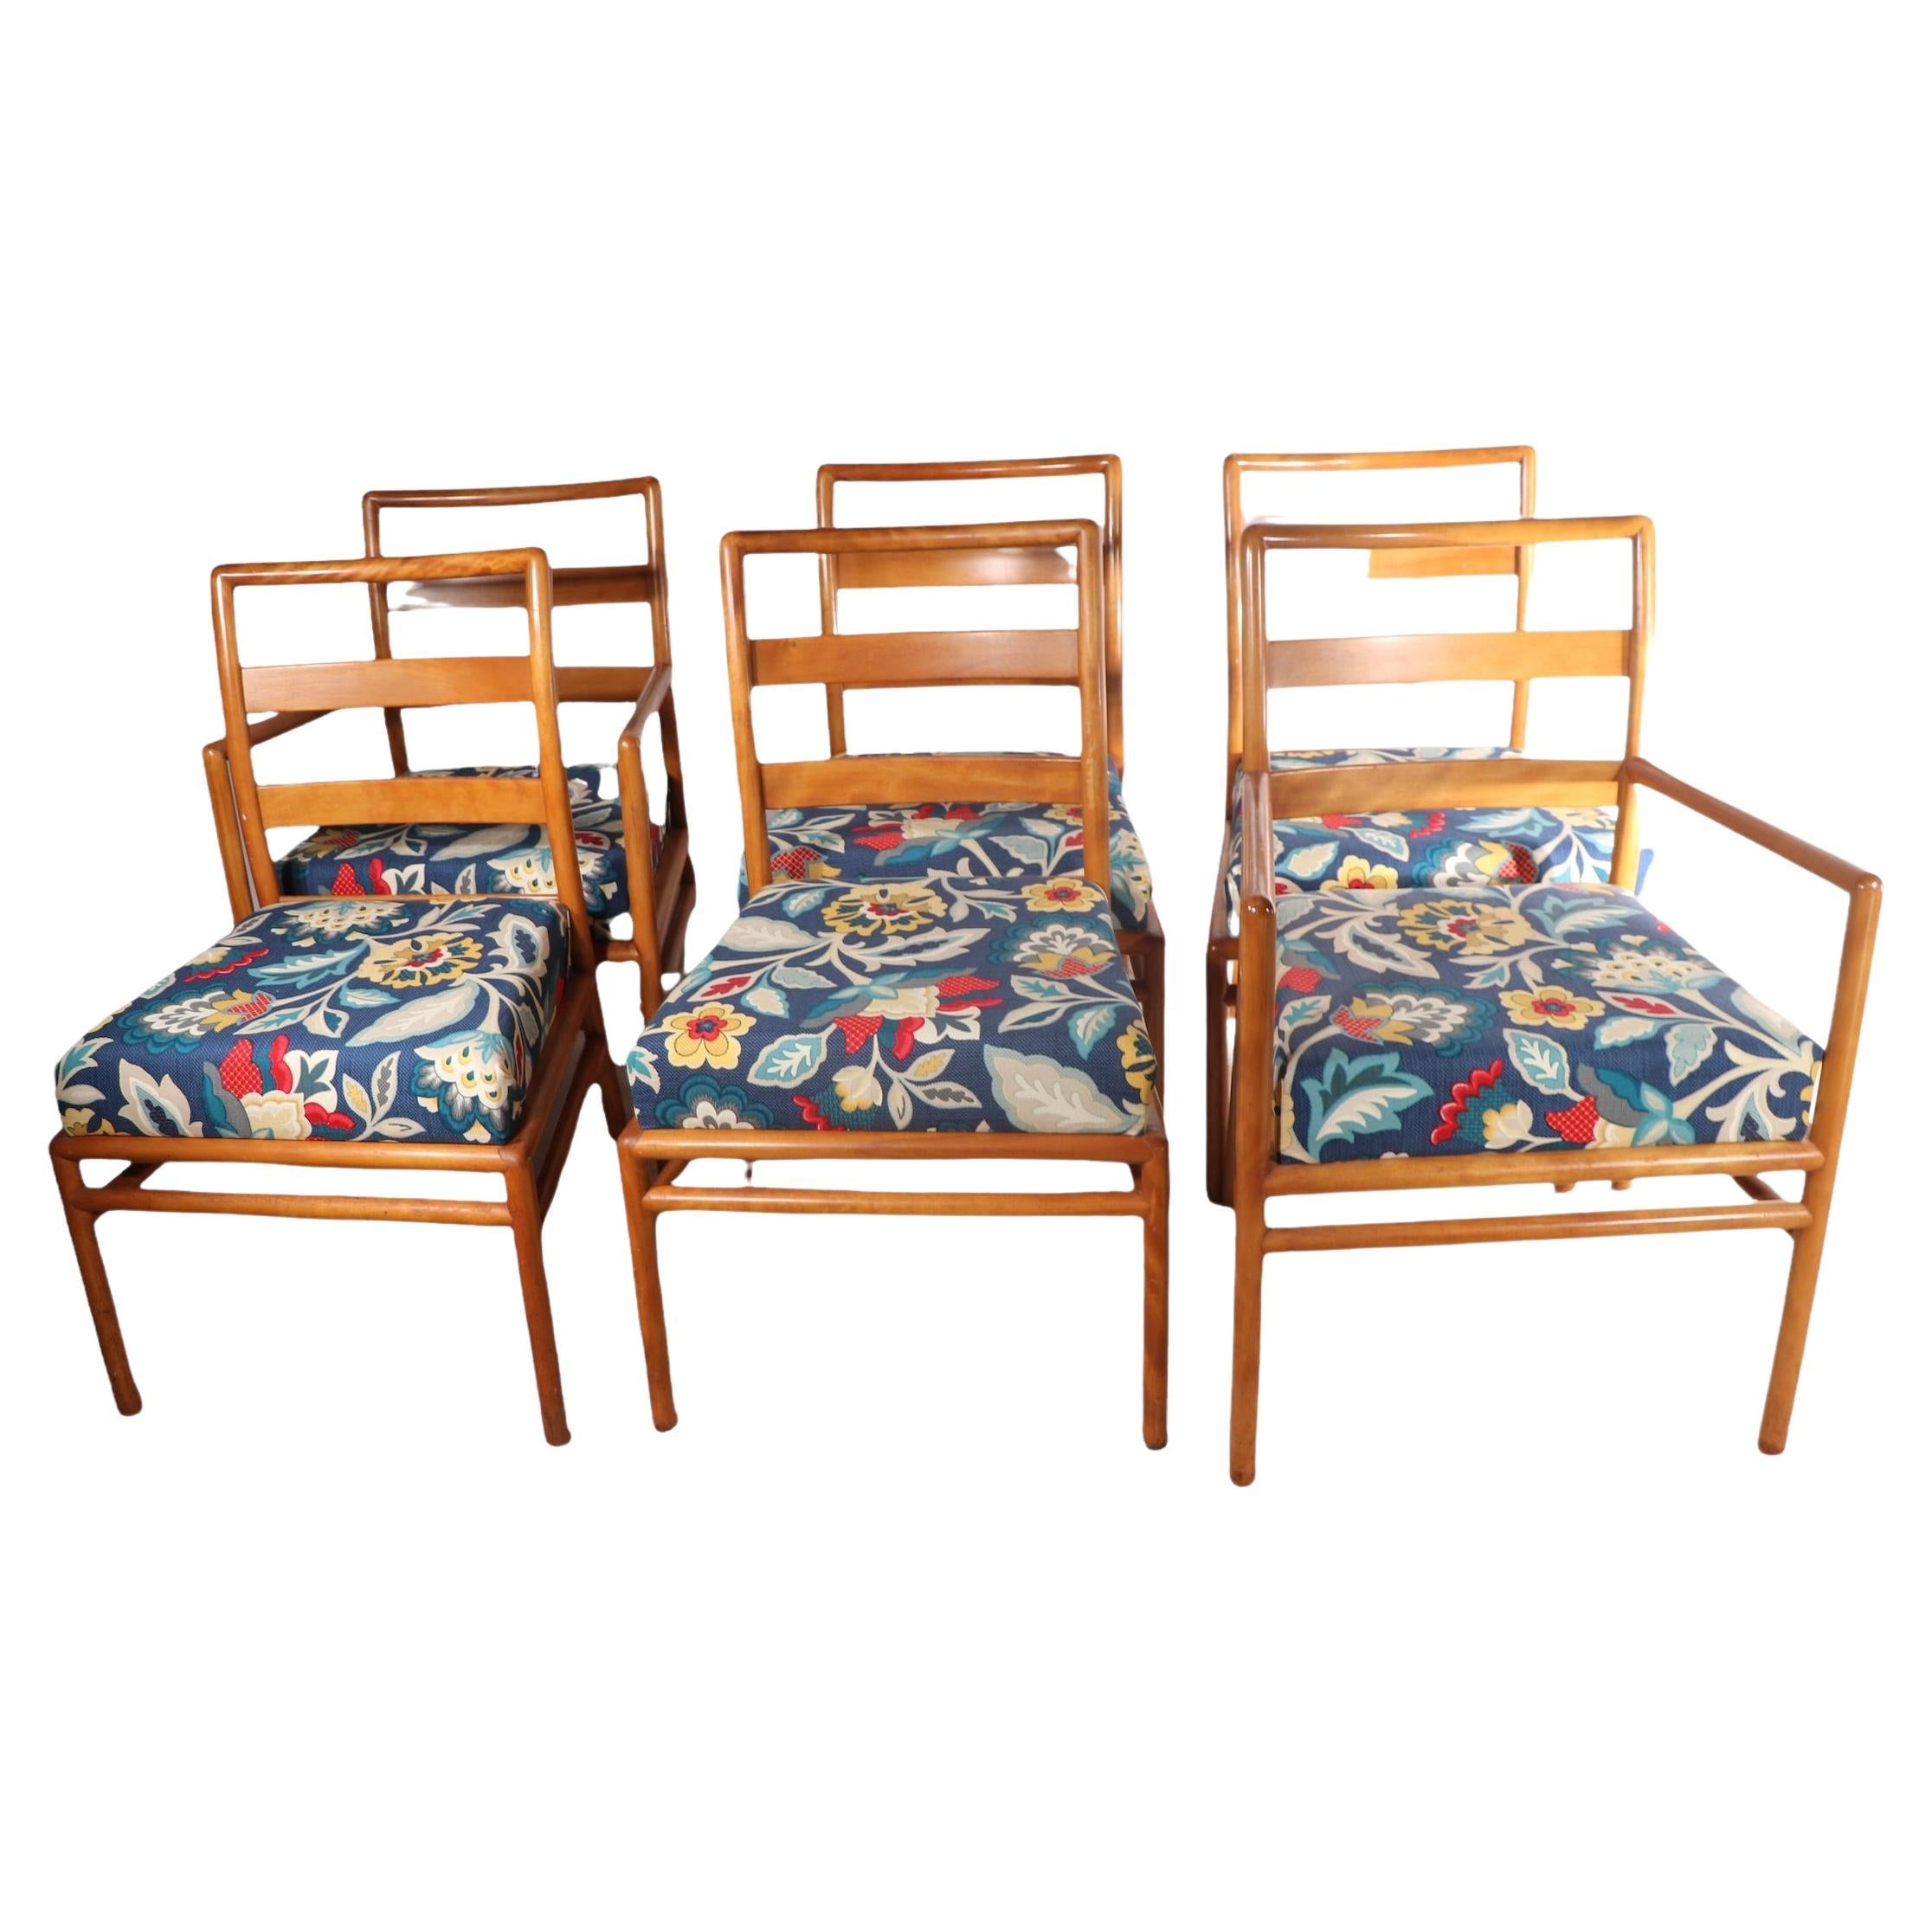 Exceptional set of 6 dining chairs by noted mid century designer, Robsjohn Gibbings, for Widdicomb Furniture. The set includes 2 arm, and 4 armless chairs, it is in very good condition, showing only light cosmetic ear, normal and consistent with